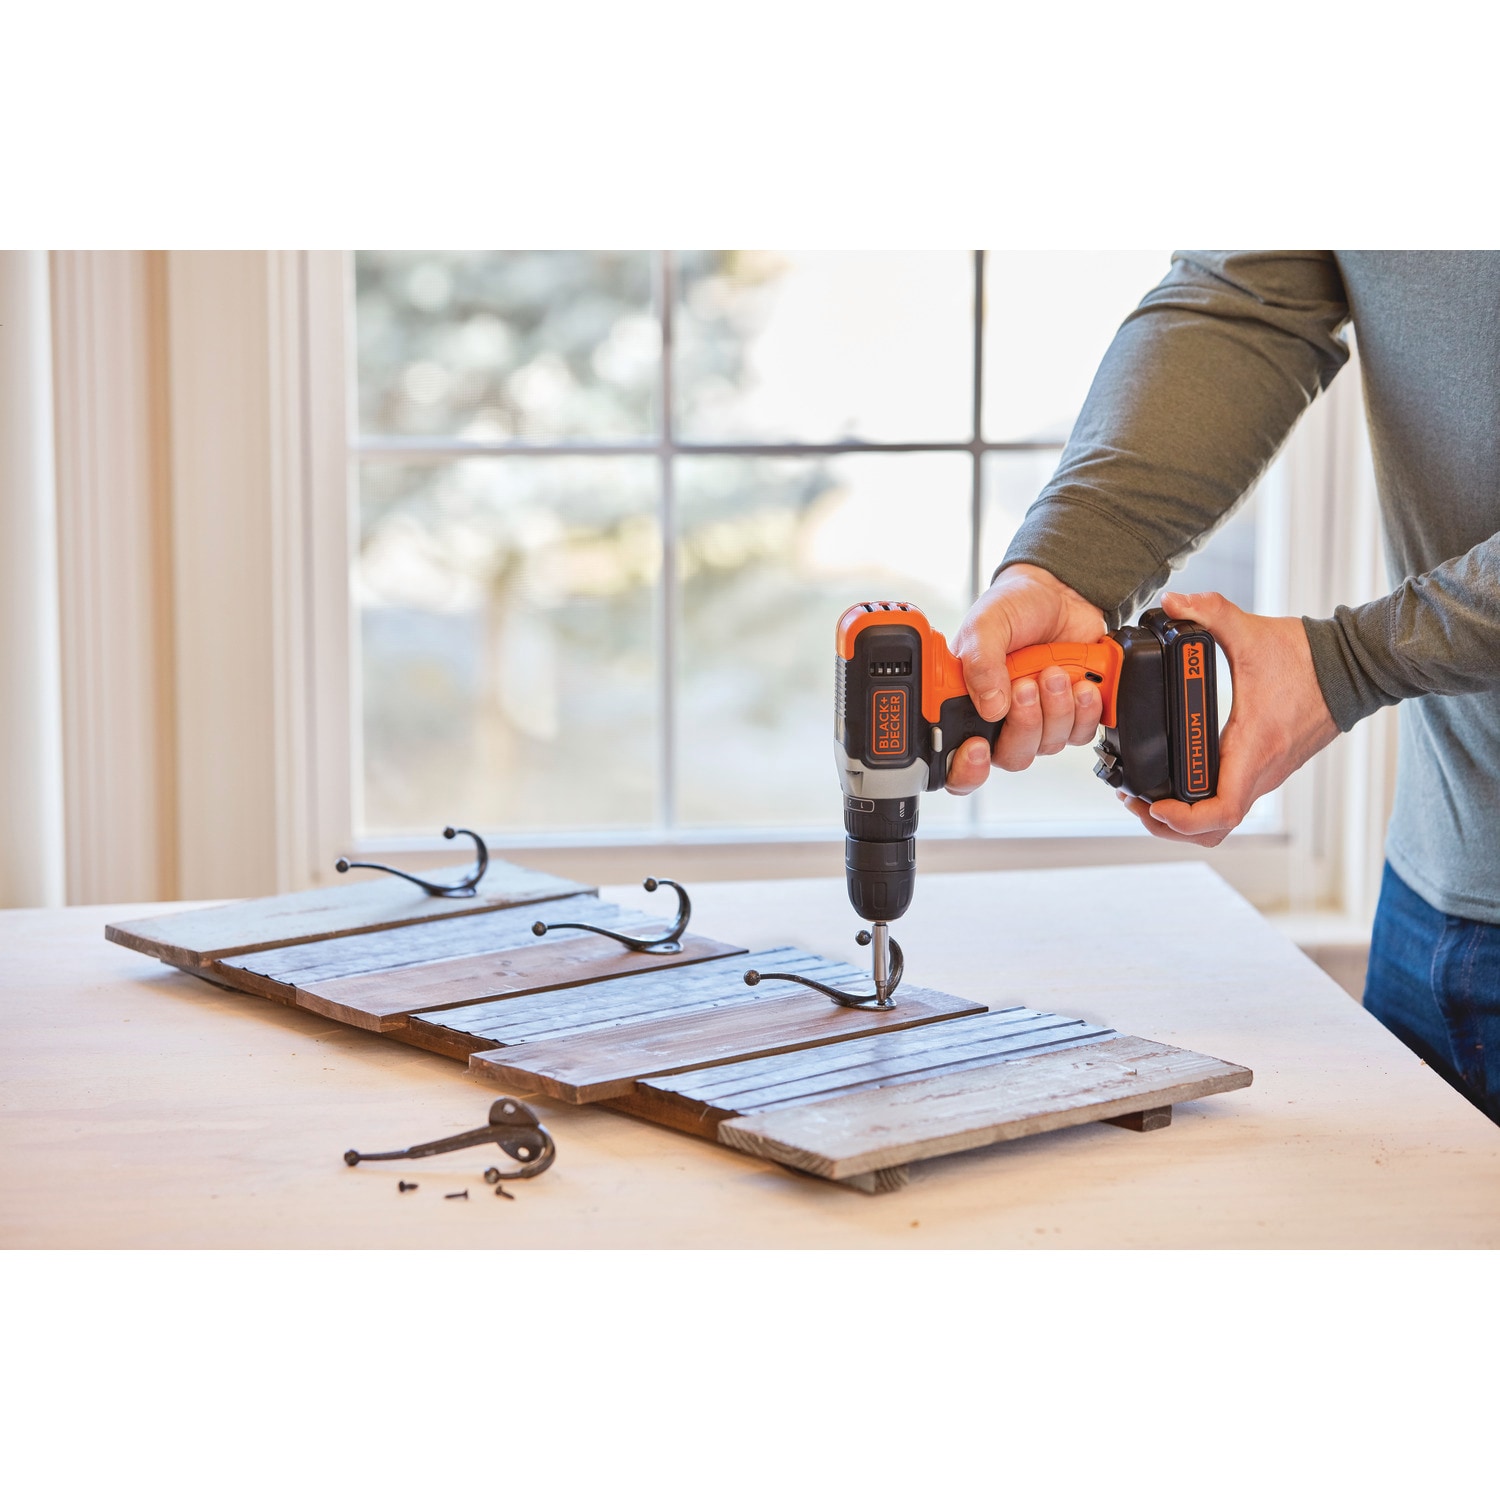 BLACK+DECKER Drilling and Driving Complete Home Essentials Set (129-Piece)  71-91291 - The Home Depot